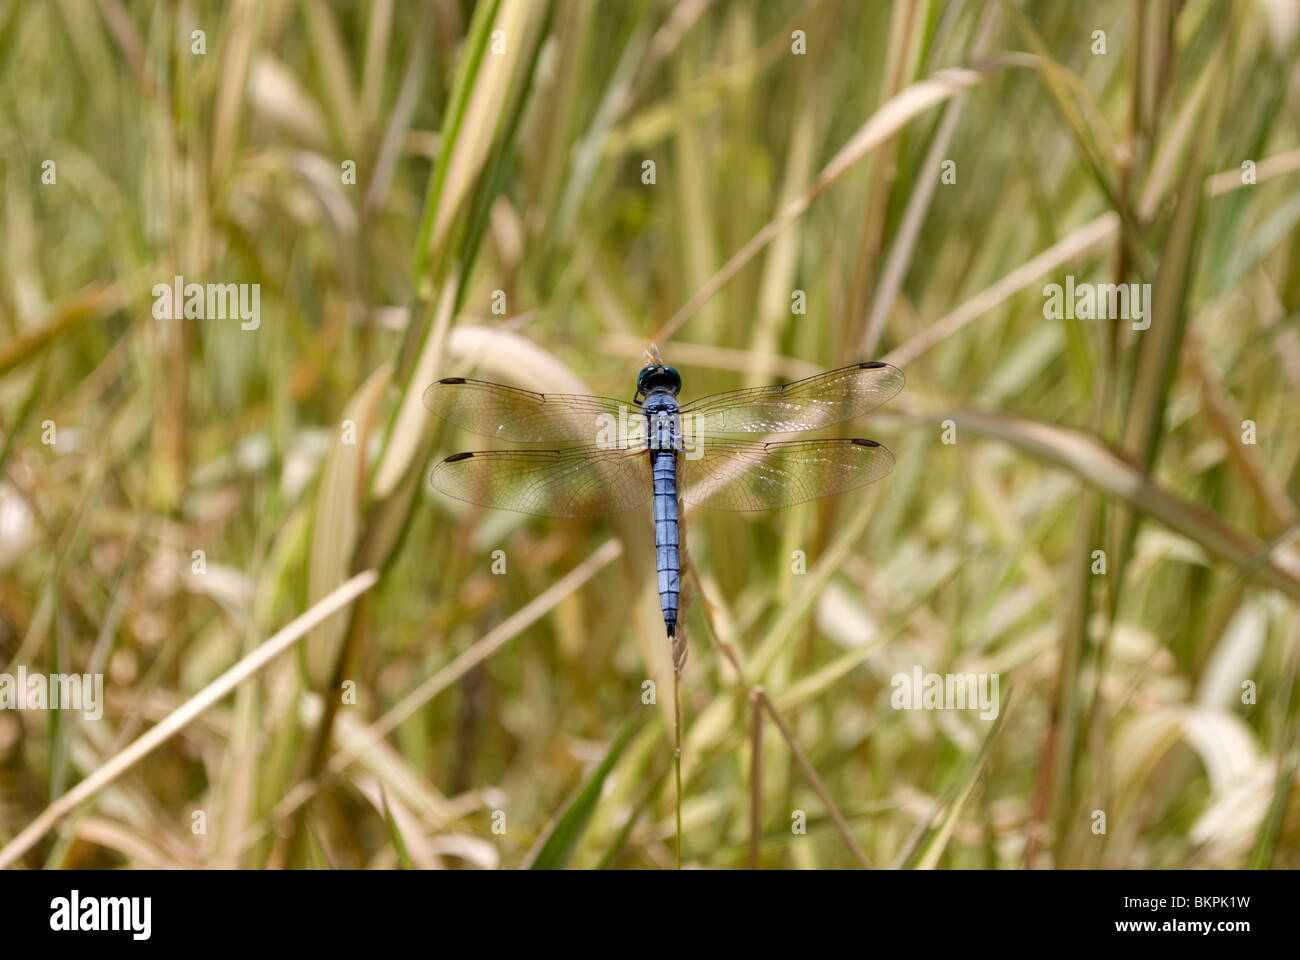 A male Blue Dasher Dragonfly (Pachydiplax longipennis) resting on the tip of a wild grass plant at the Rio Grande Botanic Garden Stock Photo